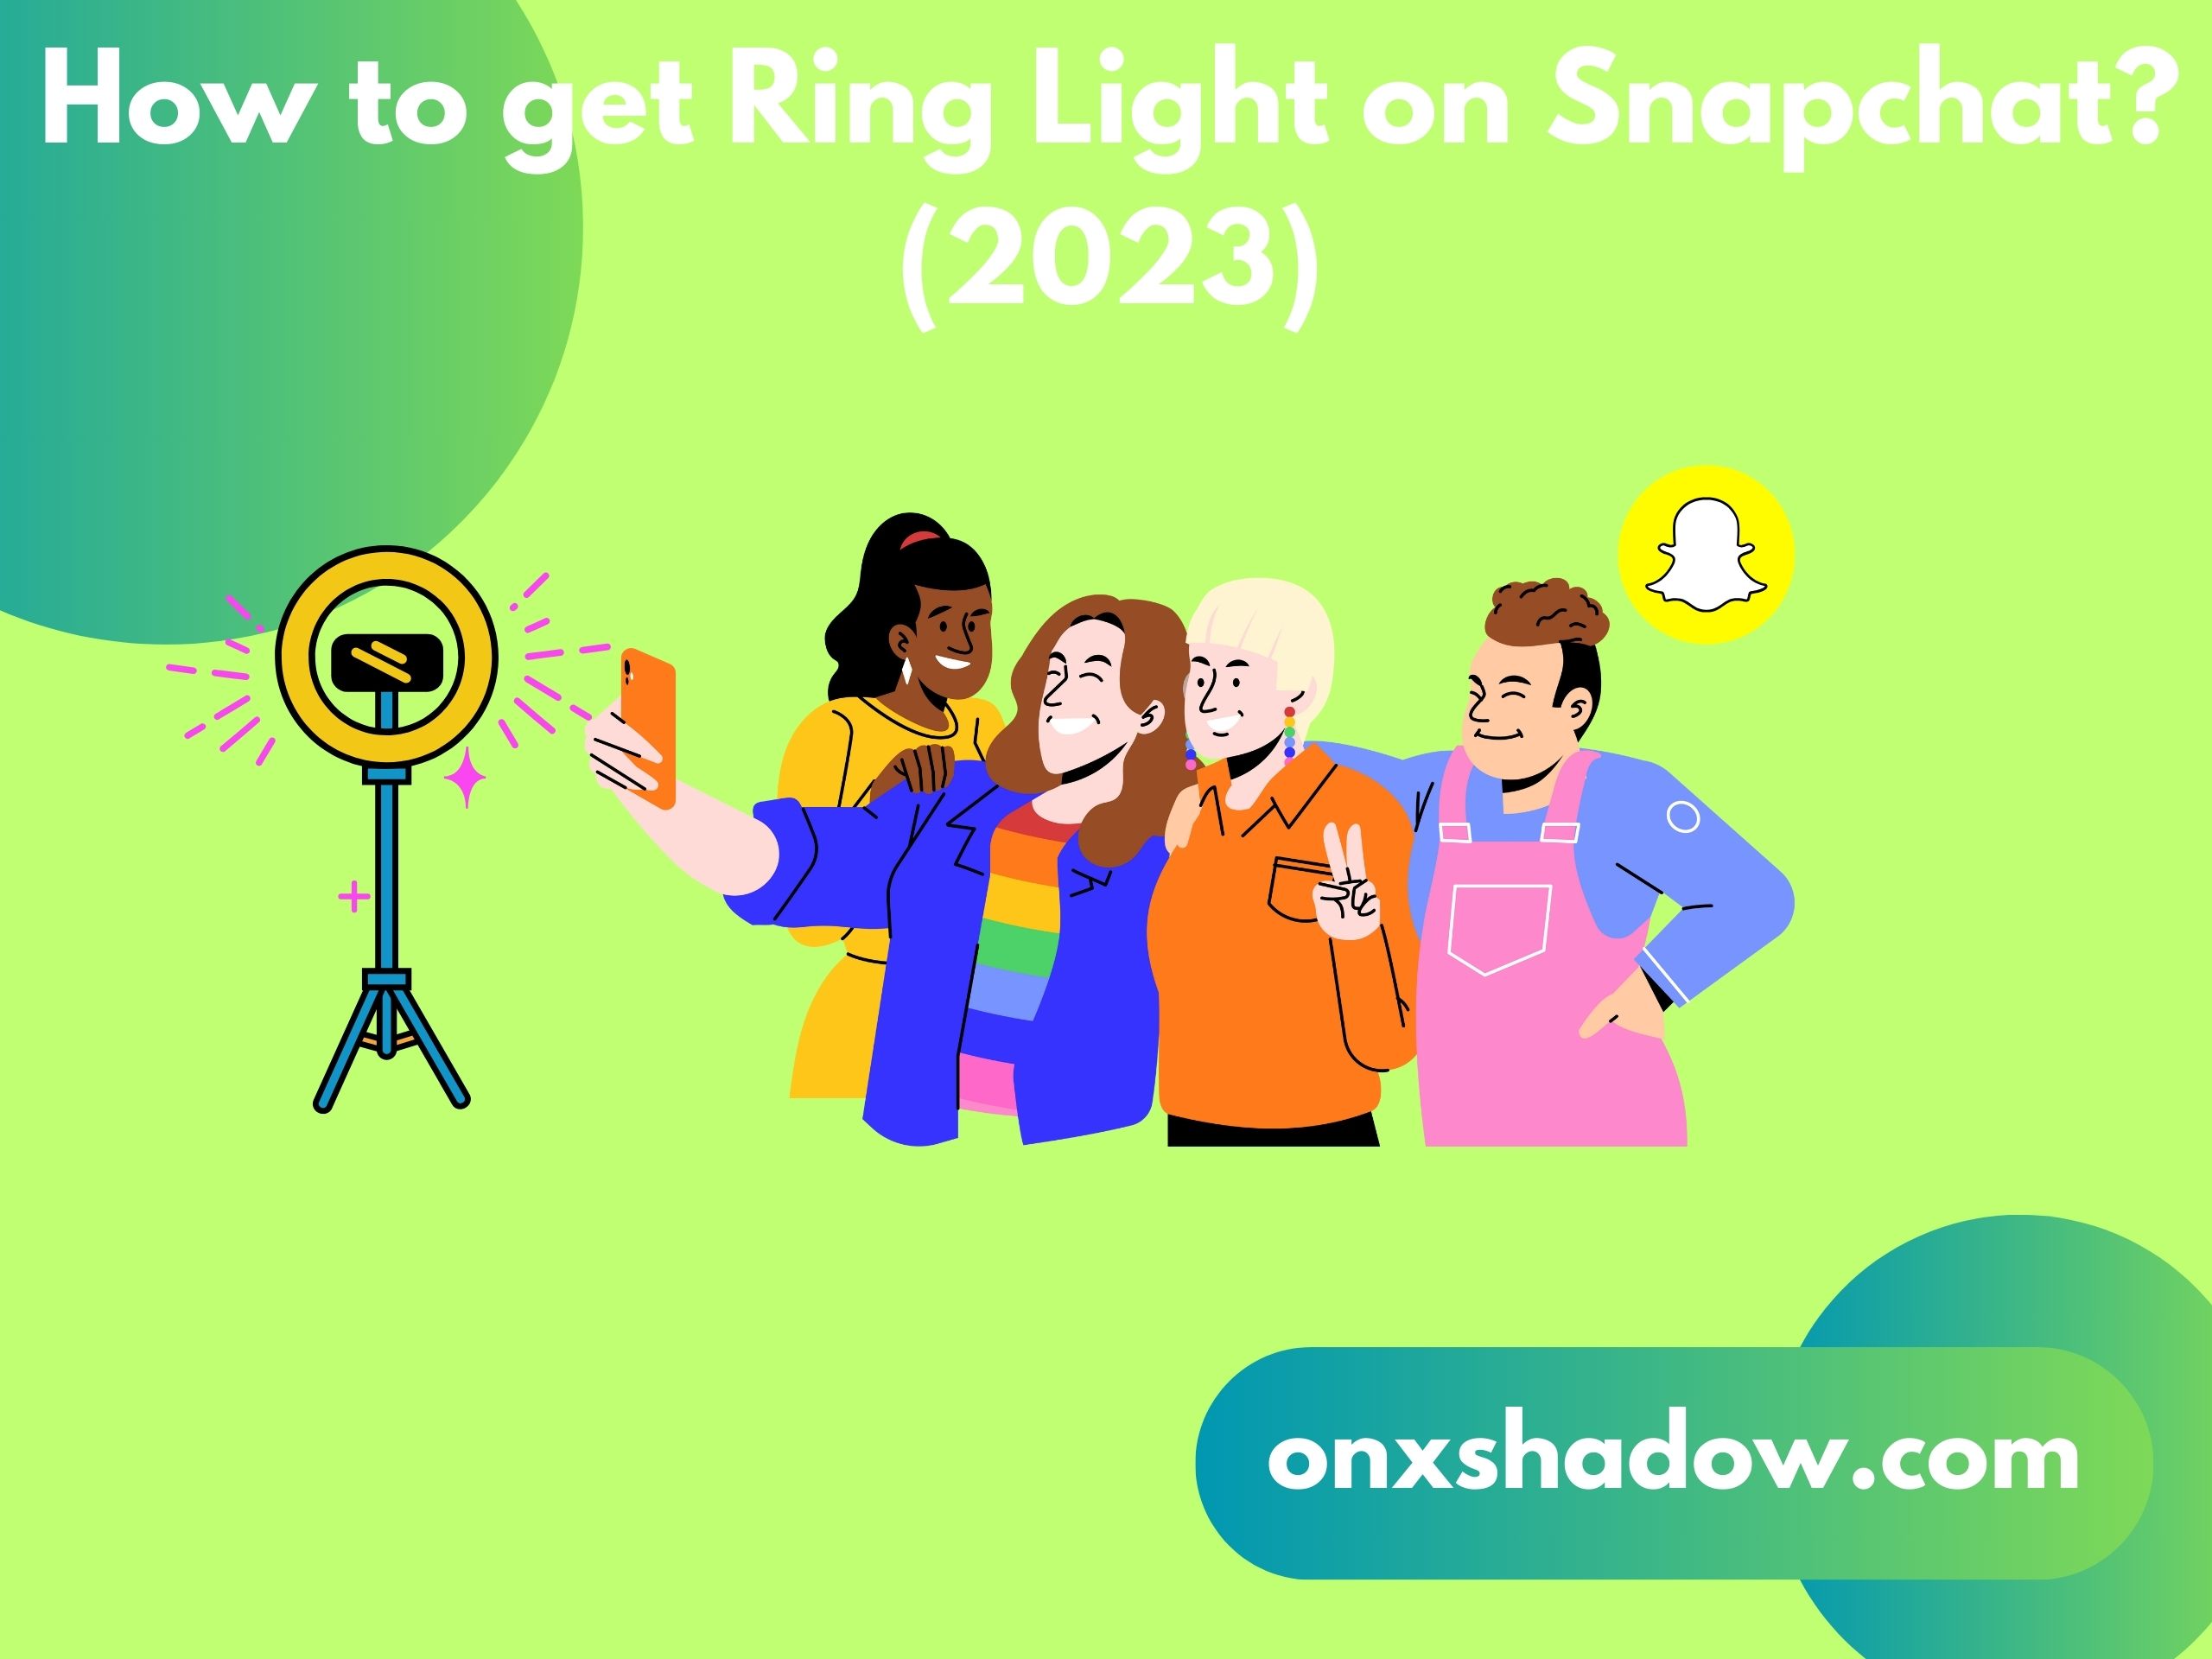 How to get Ring Light on Snapchat? (2023)